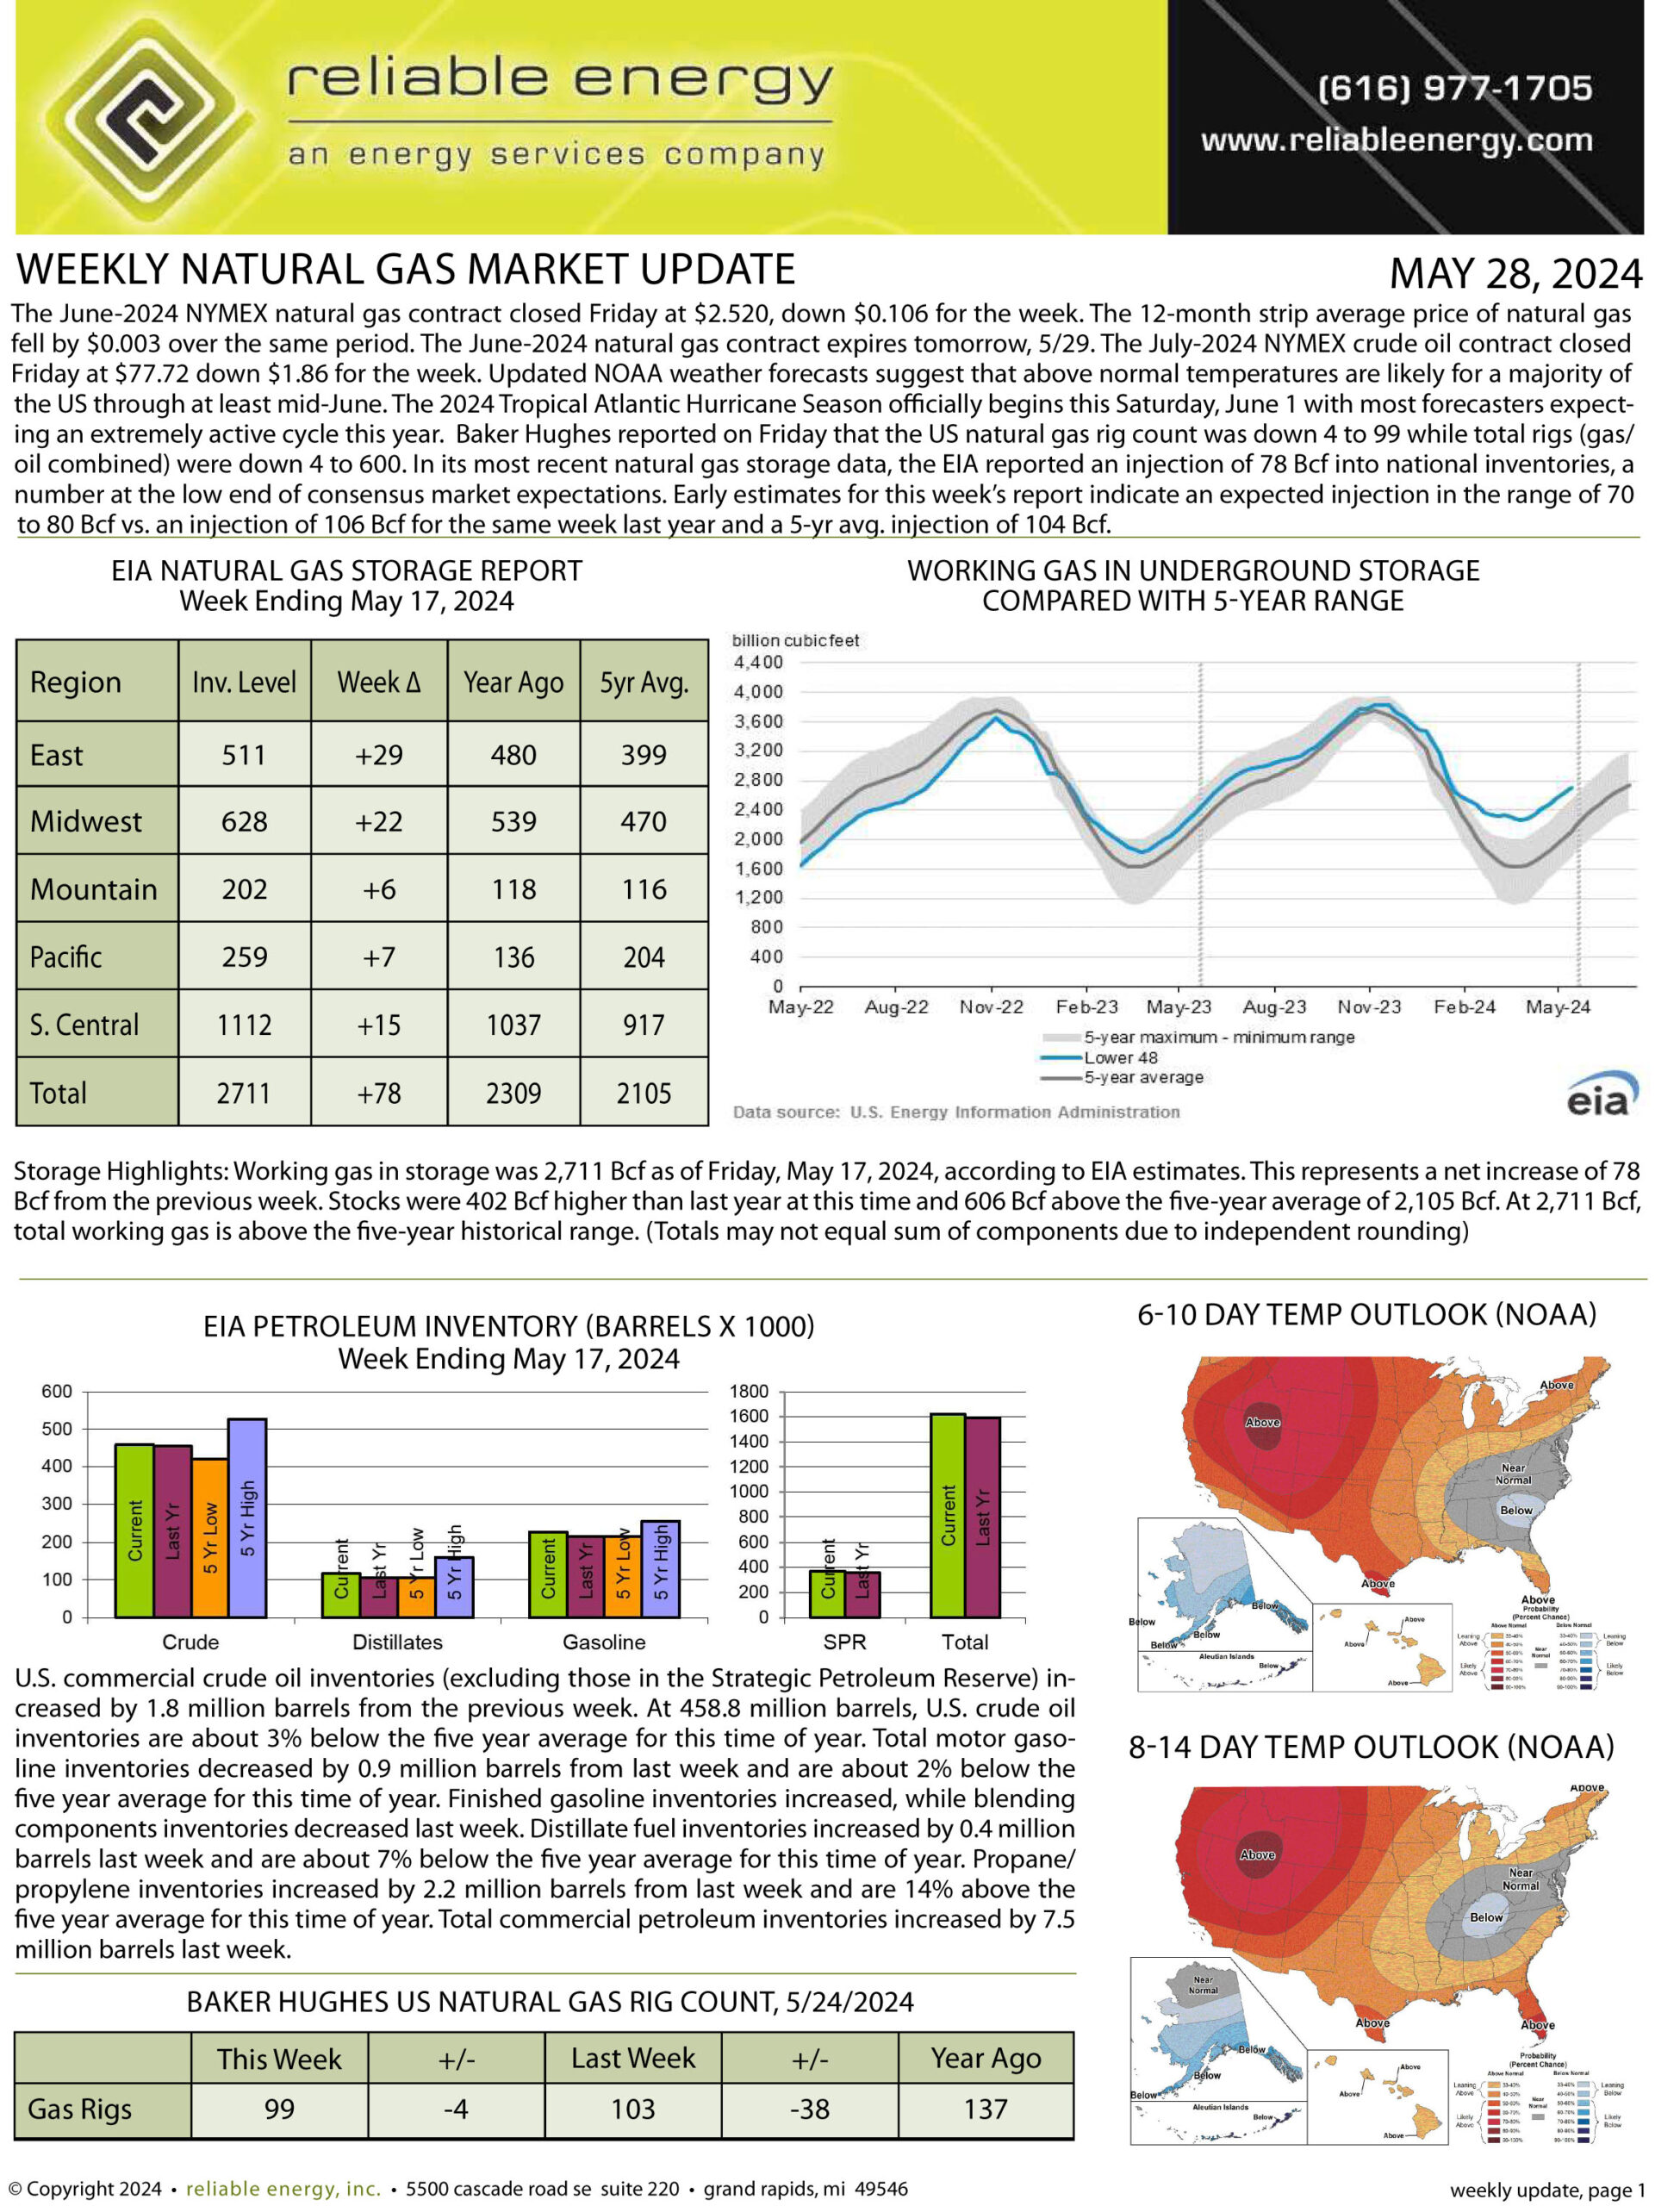 Natural Gas Market Update – May 28, 2024